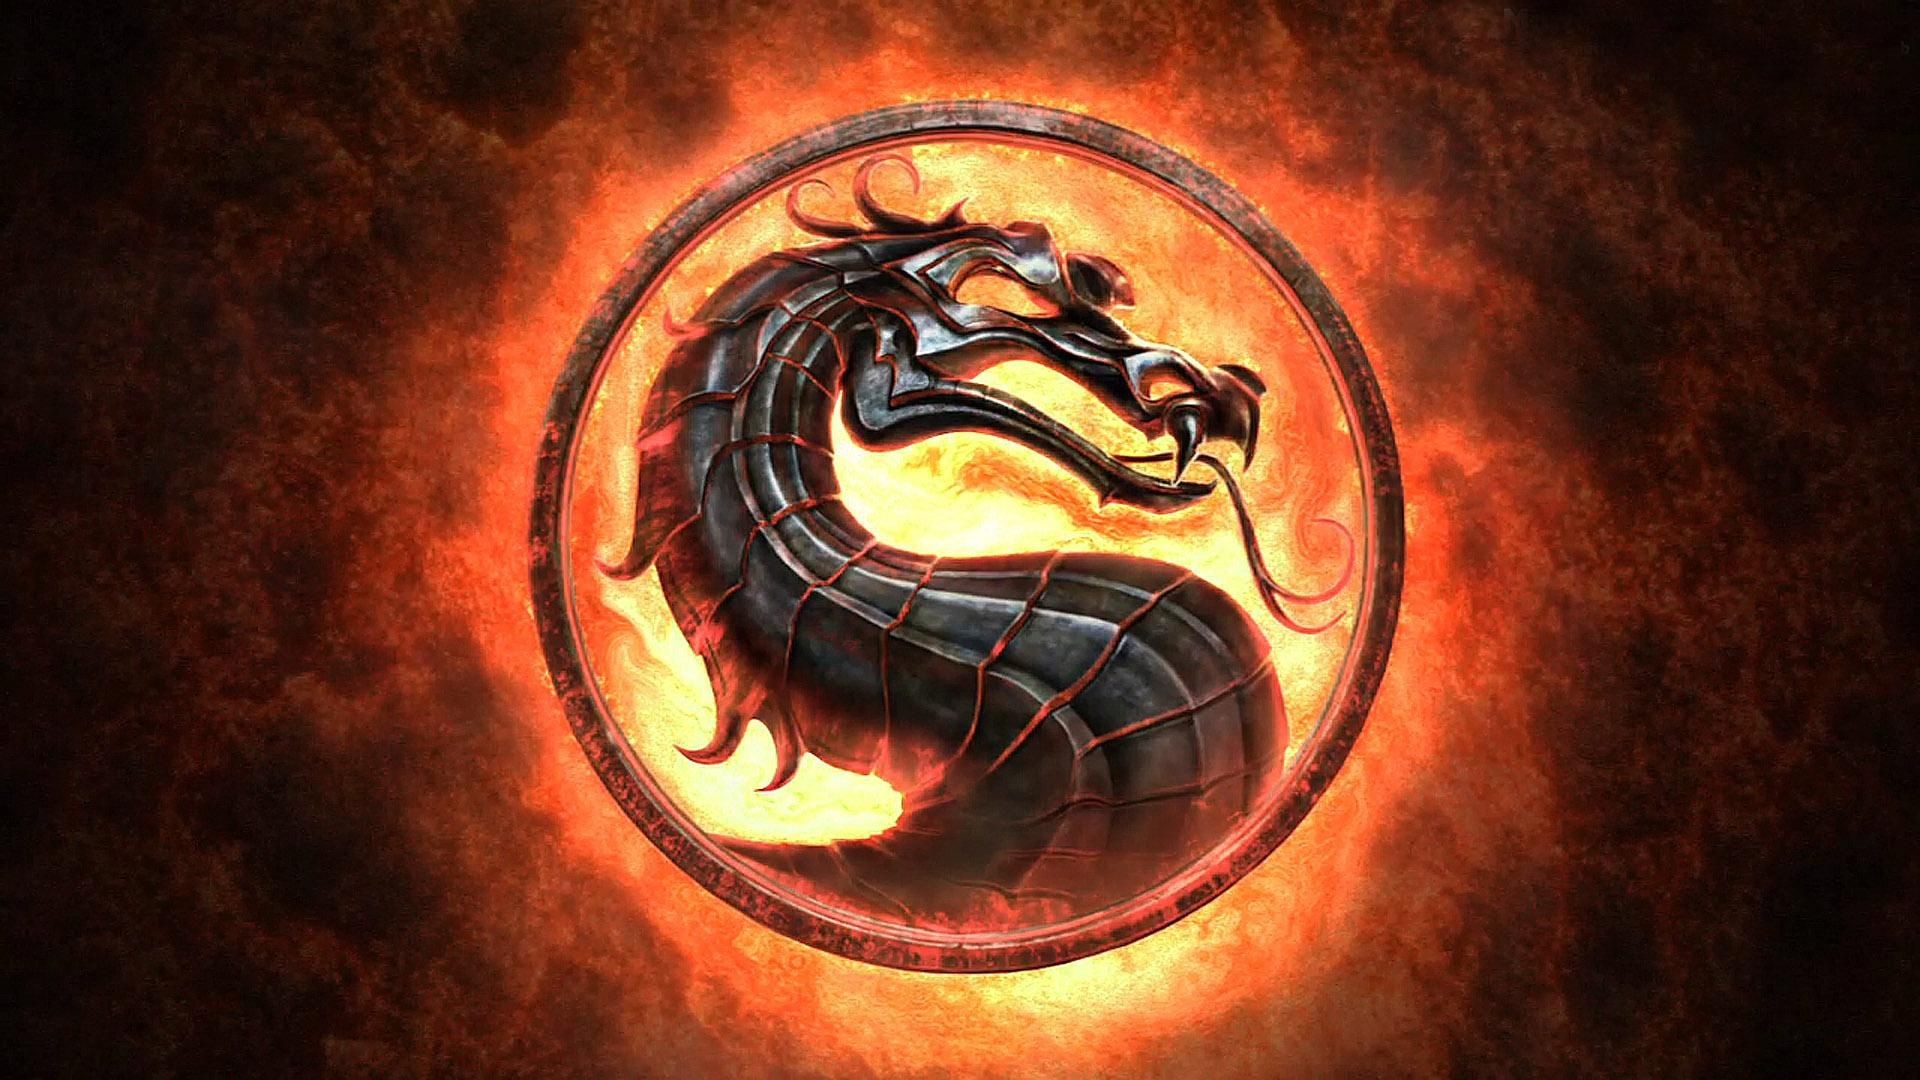 Mortal Kombat Reboot: The Film Won’t Have A Trailer Or Release Date Until Theaters Reopen